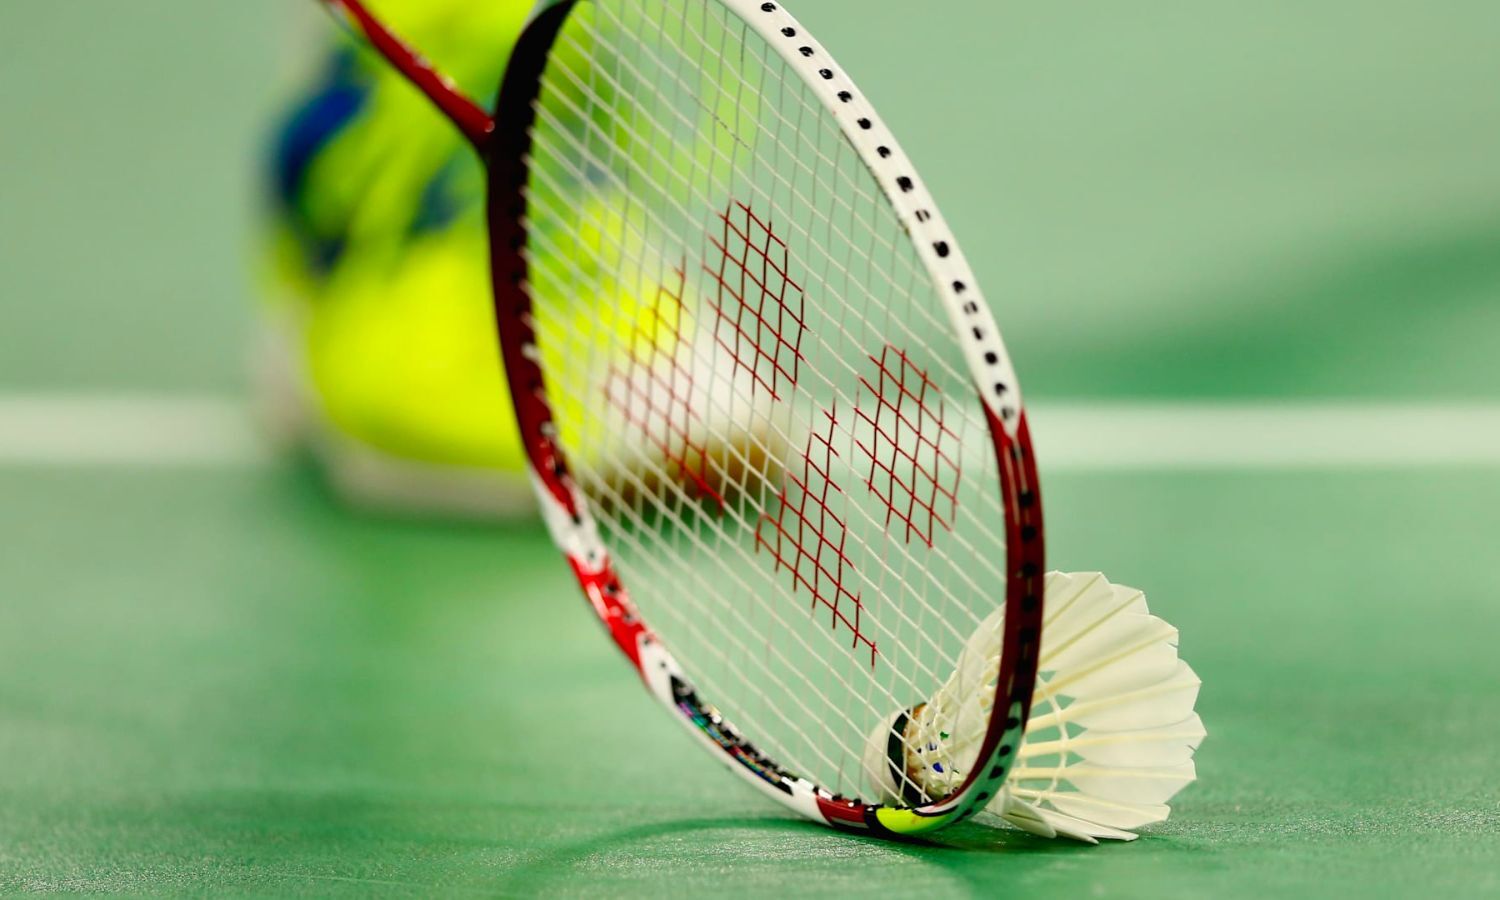 You are currently viewing Delhi Capital announces mixed badminton team for National Games